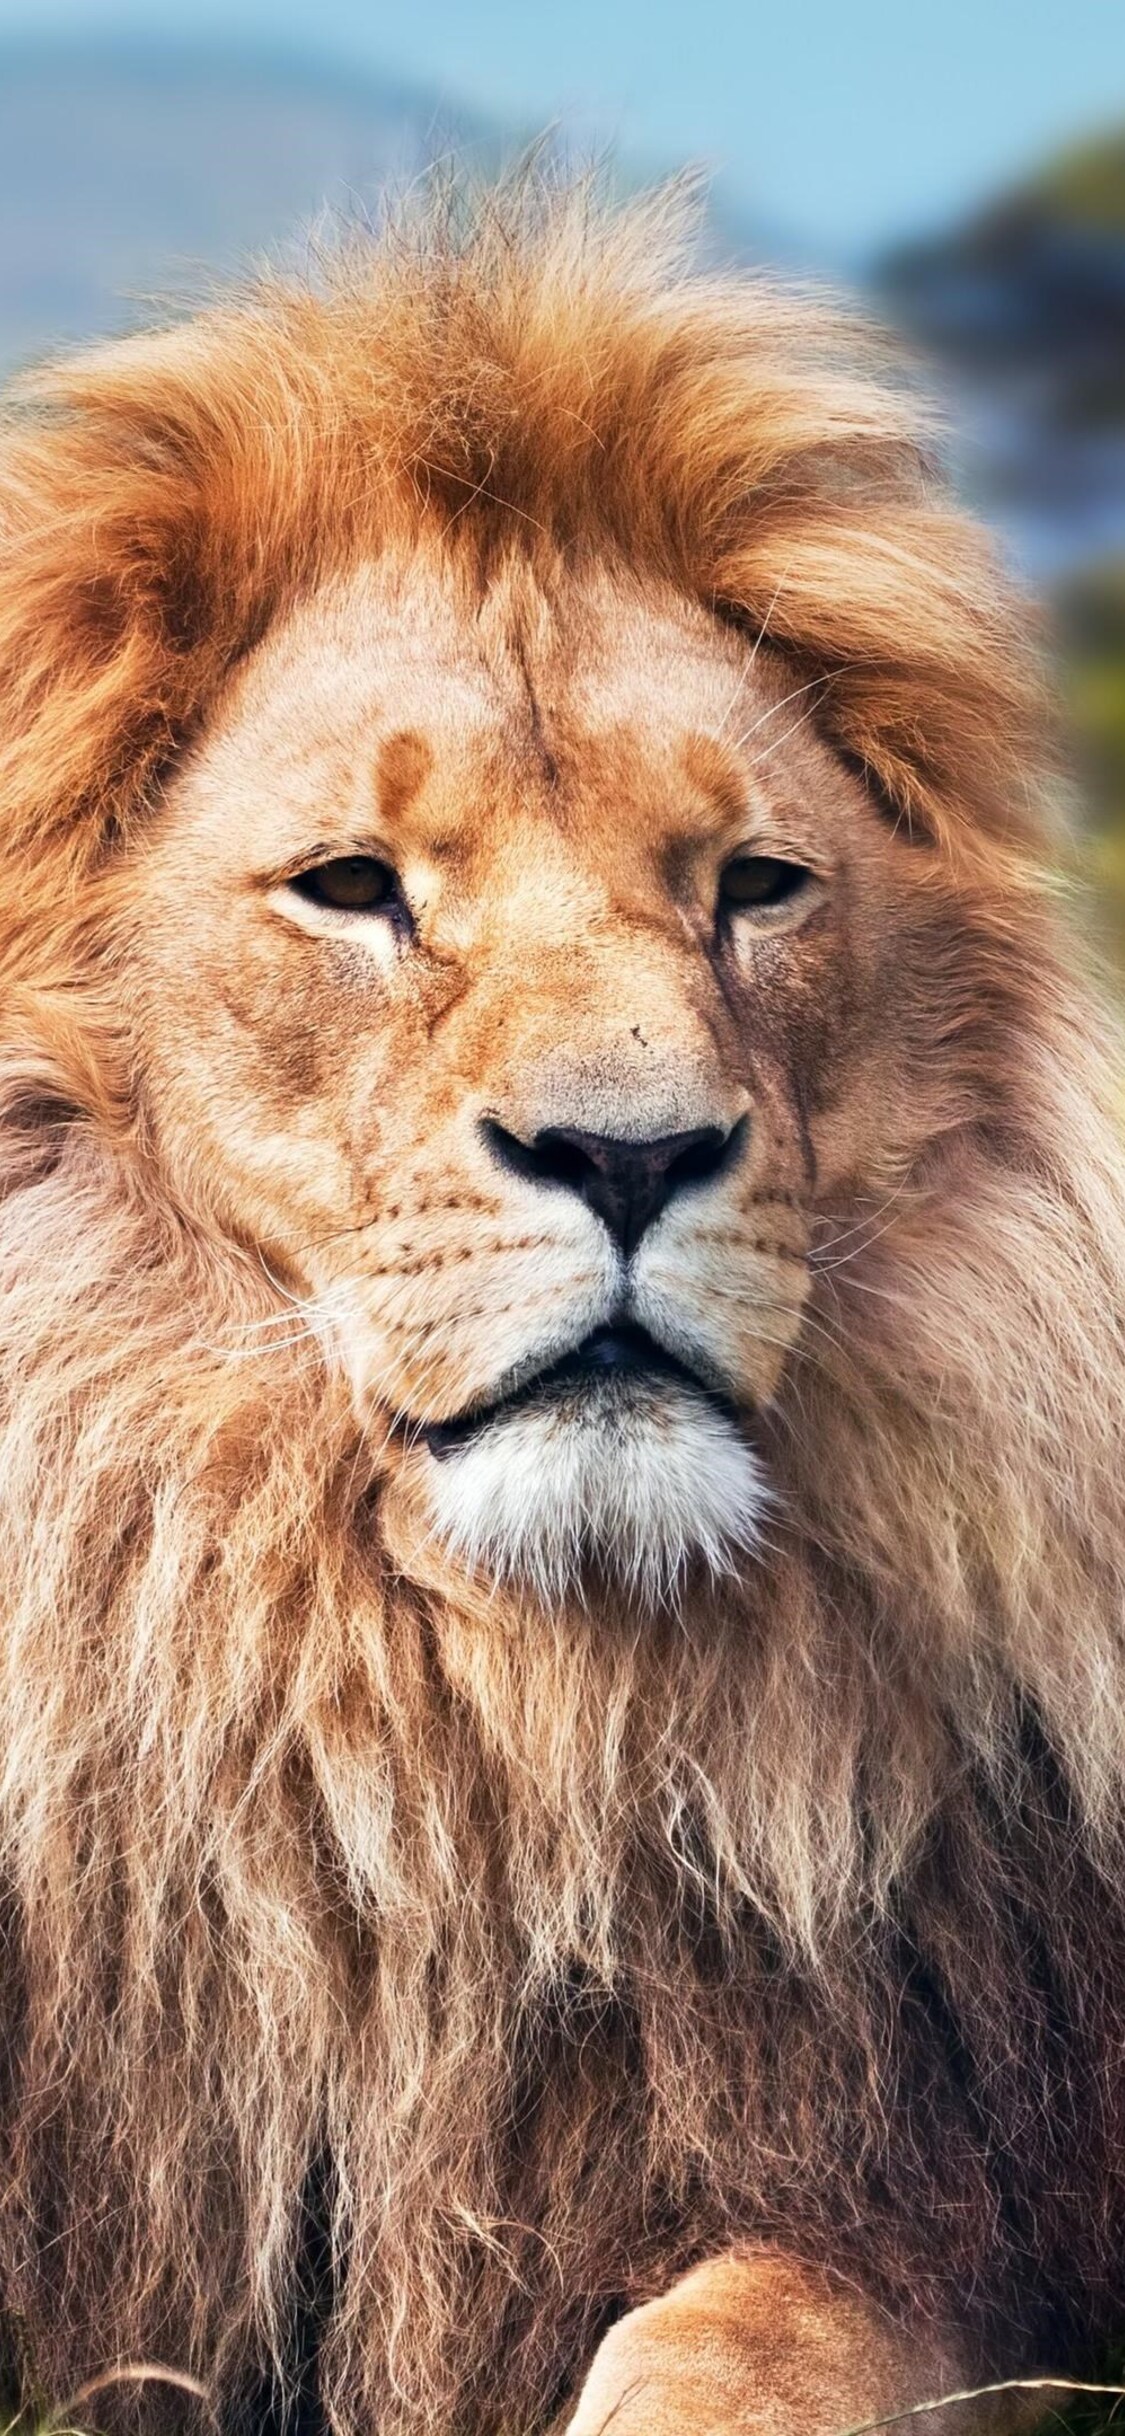 iPhone Lion 4k Wallpapers - Wallpaper Cave